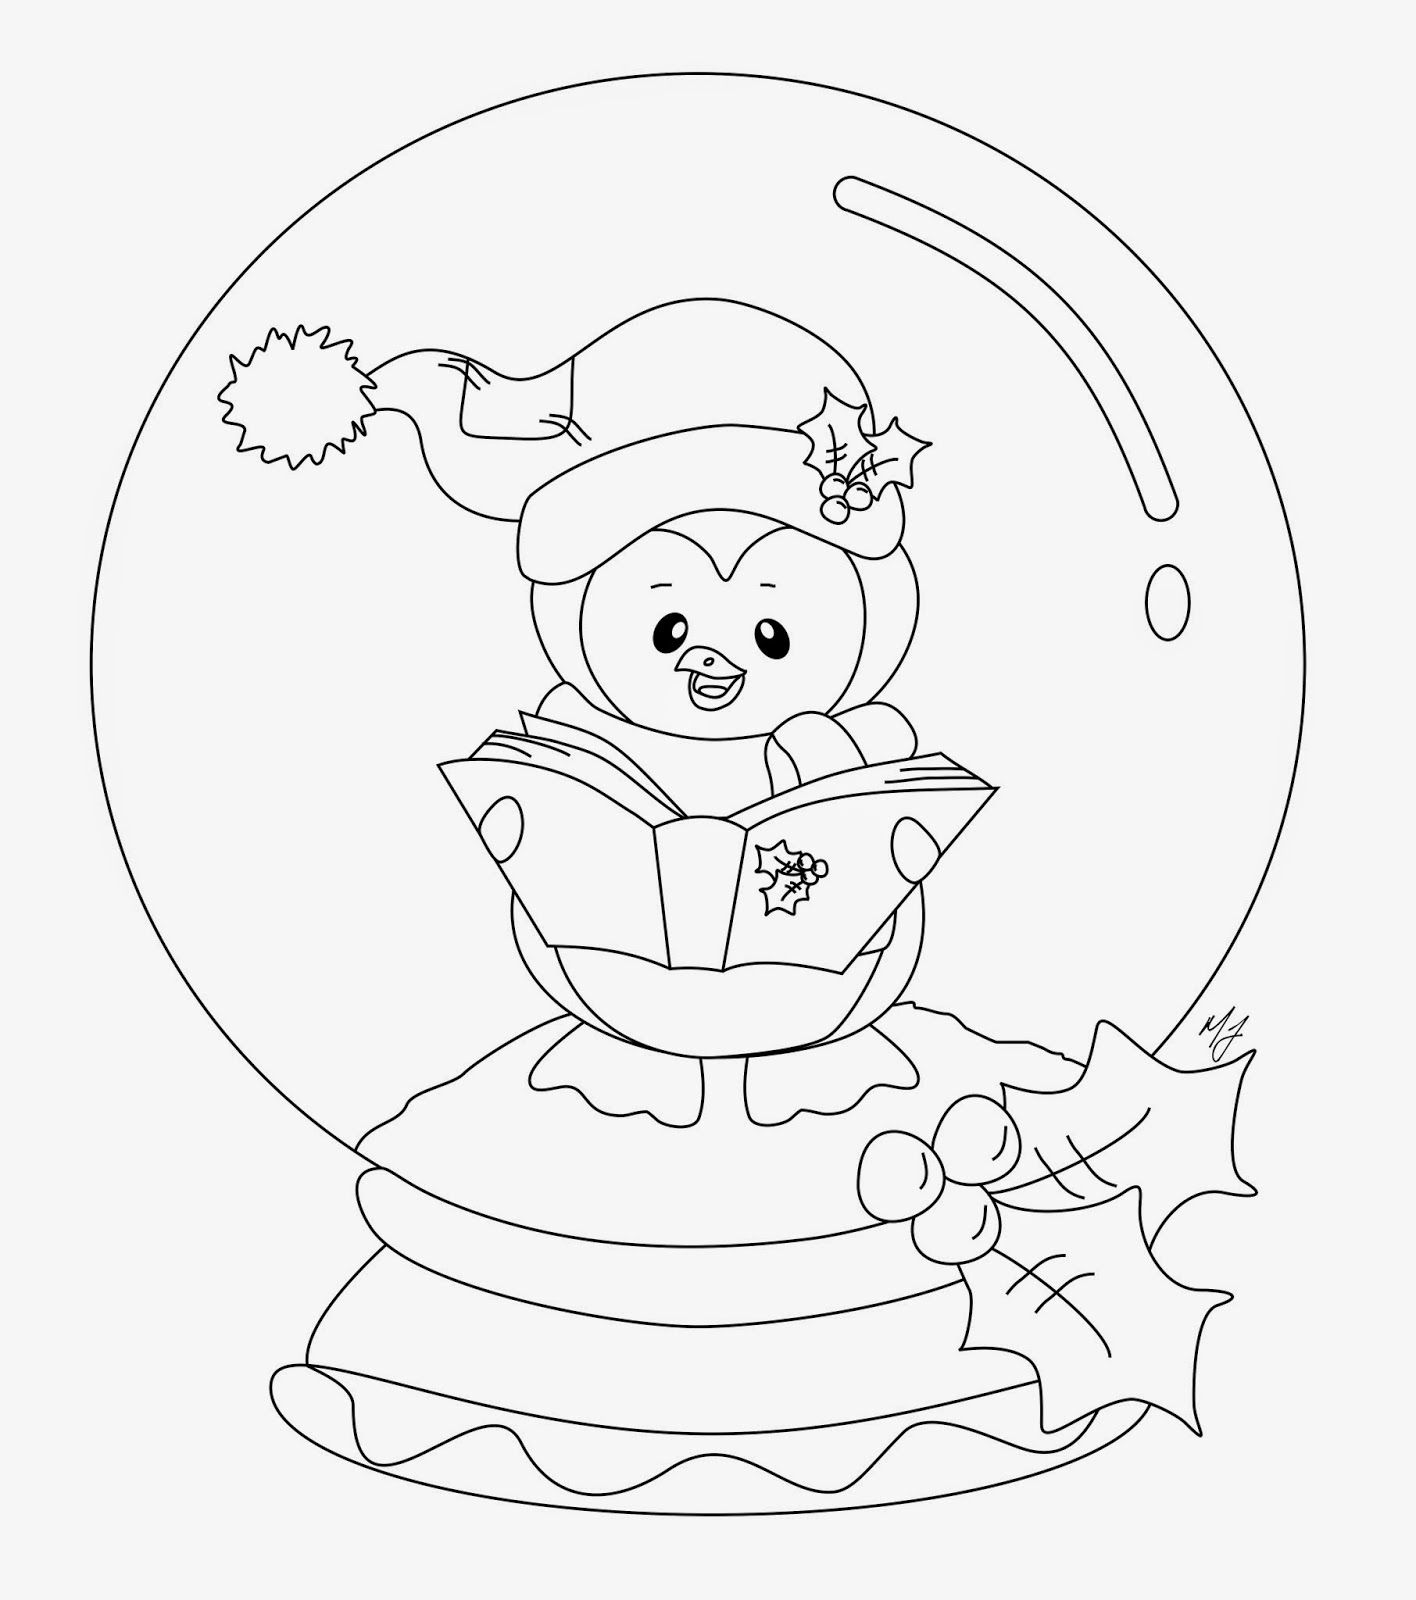 New Snow Globe Coloring Page Design | Penguin coloring pages, Coloring pages,  Christmas coloring pages